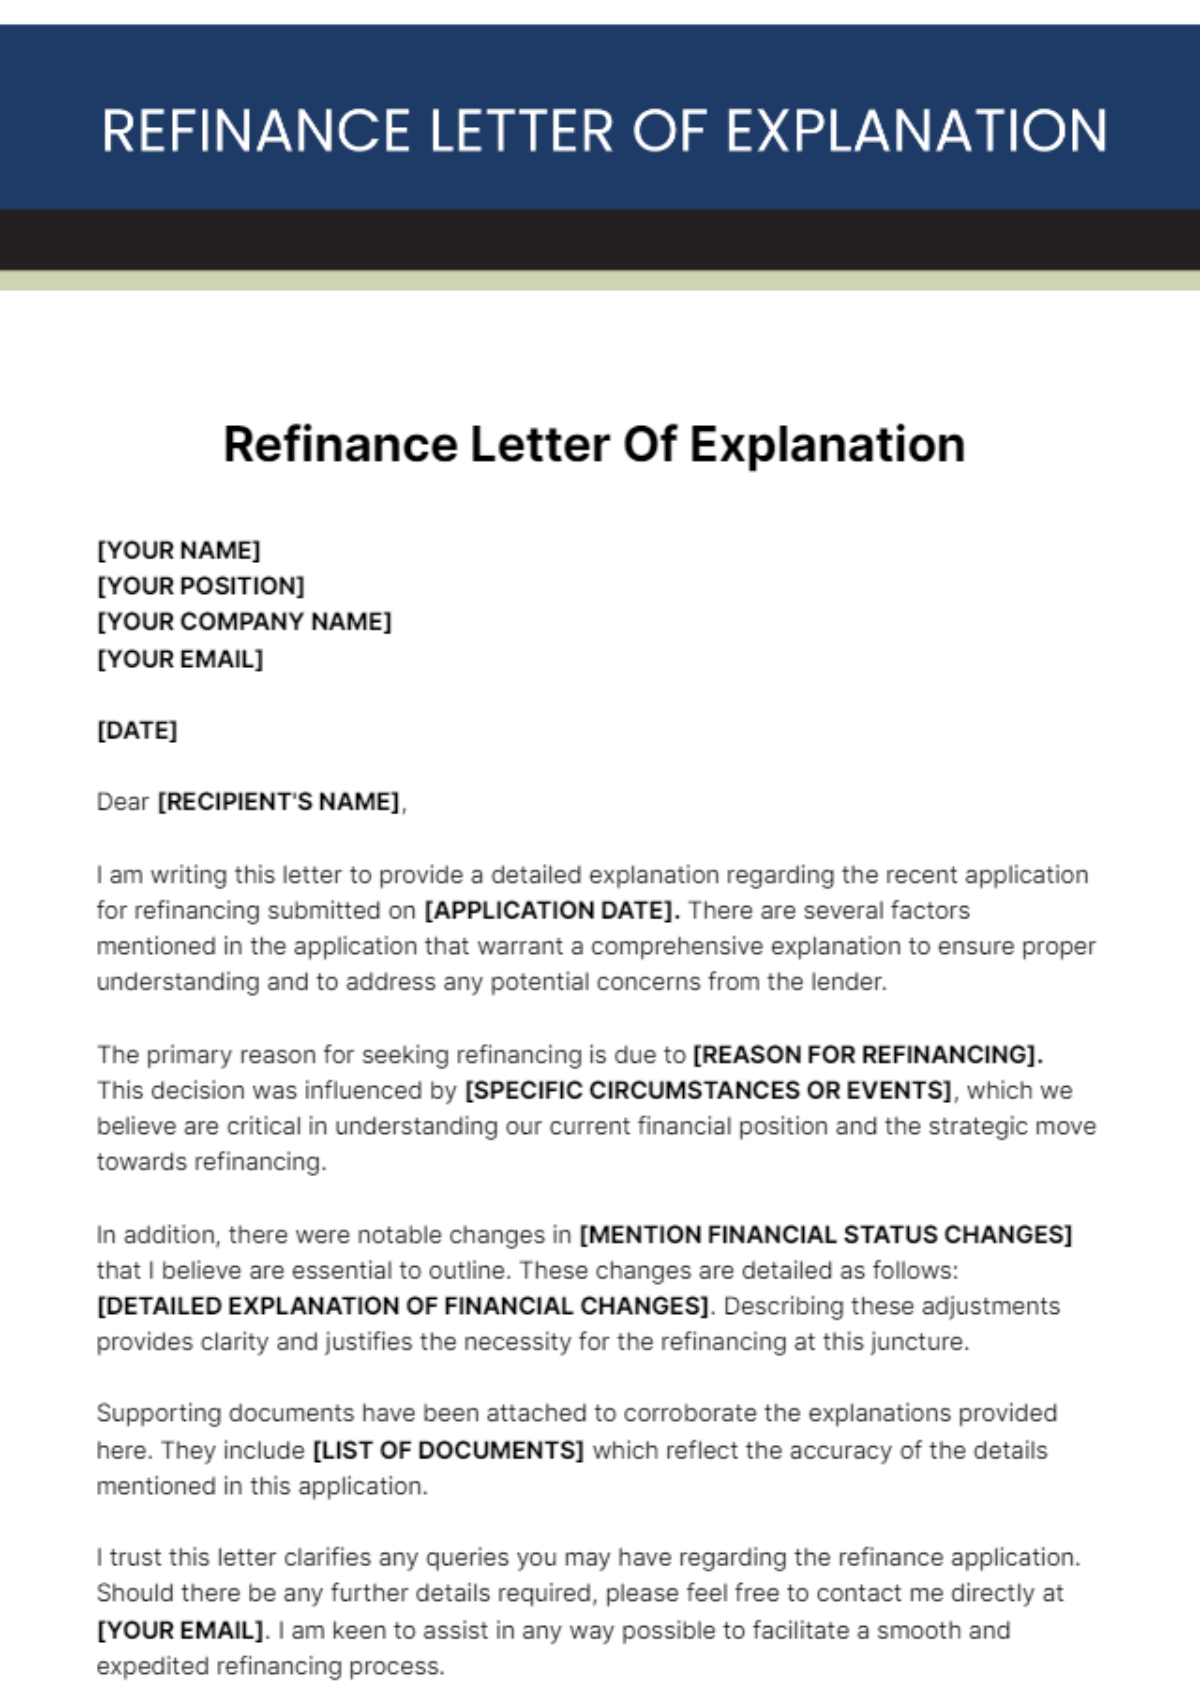 Refinance Letter Of Explanation Template